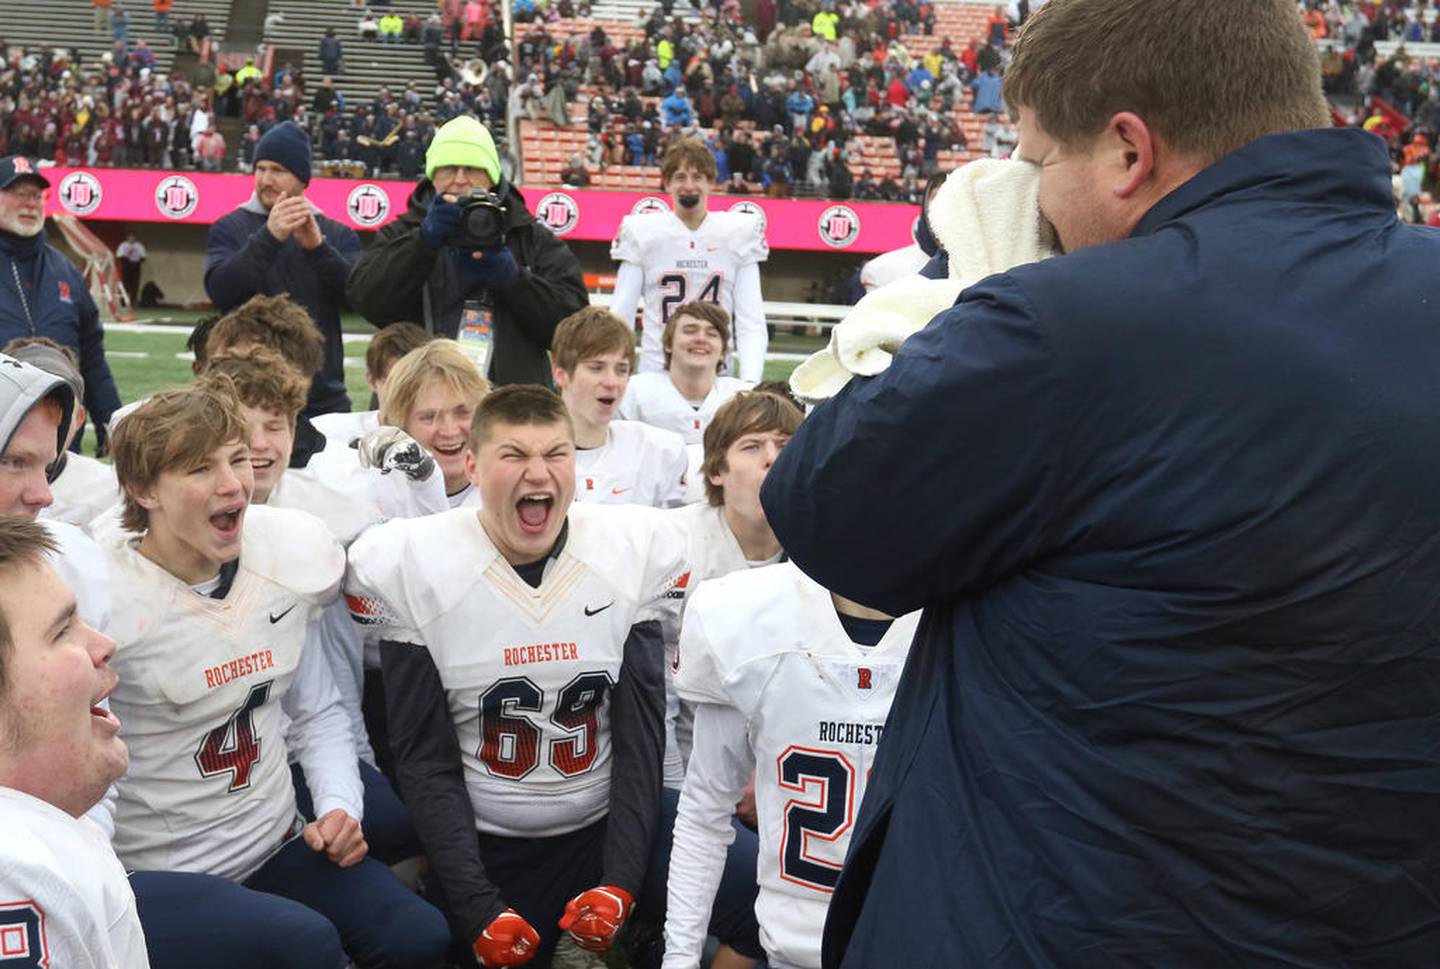 Rochester head coach Derek Leonard gets emotional as he talks to his players after their Class 5A state football championship victory over St. Rita Saturday in Huskie Stadium at Northern Illinois University.